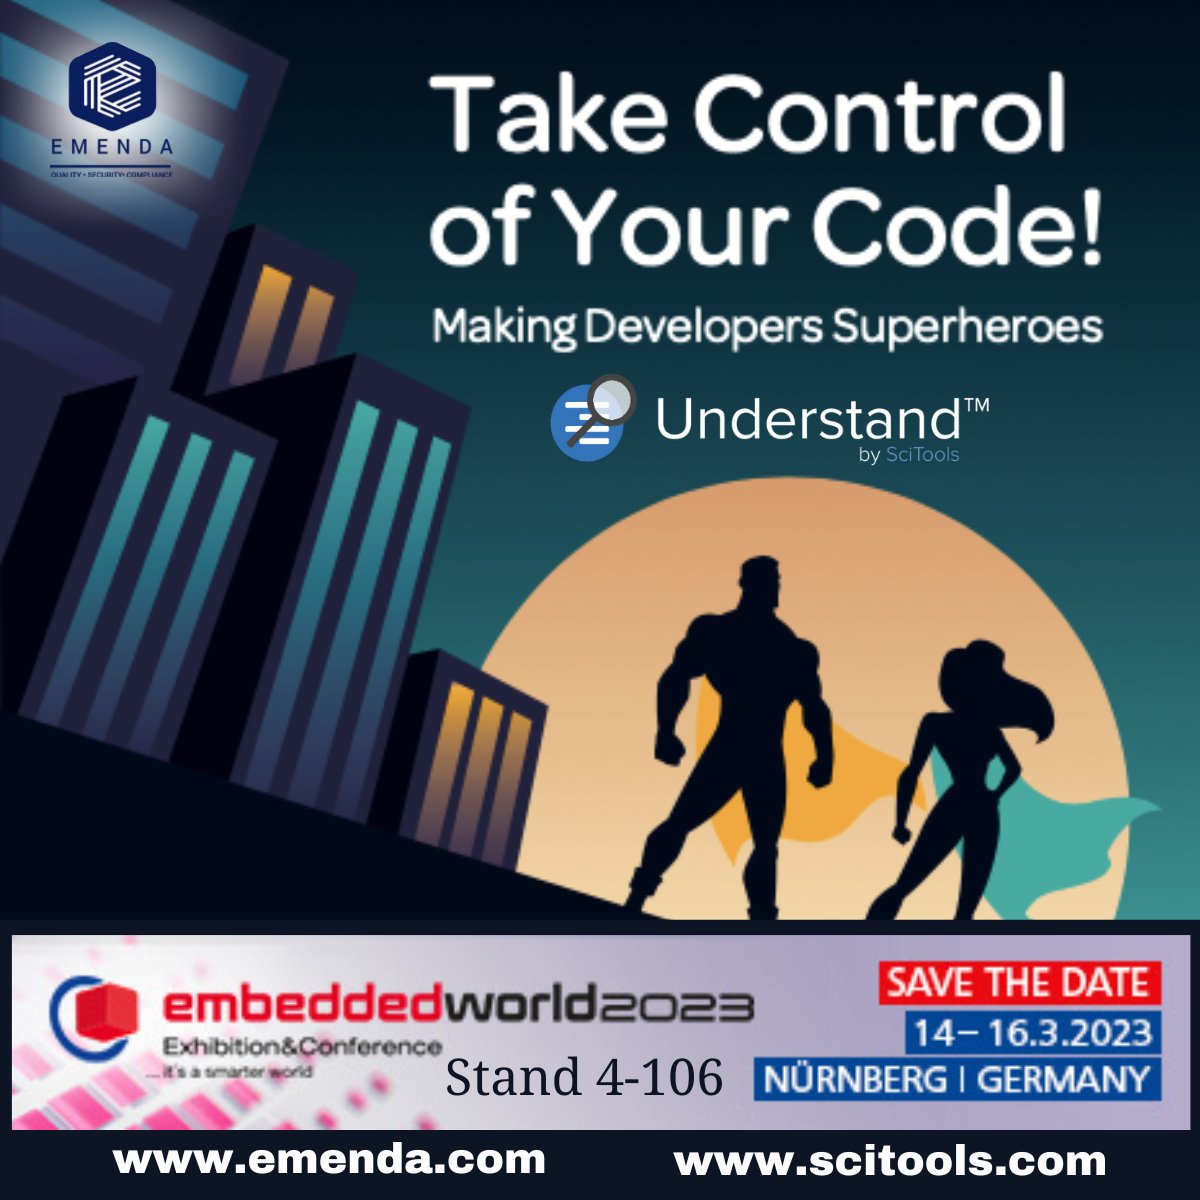 We are there! #ew23

Discover your superpowers! Understand by #Scitools. Ask our team anything! Meet the creators on 14-16 March 23 at Embedded World. Hall 4, Booth 106! We look forward to meeting you. #emenda #superhero #developer #softwareentwicklung #softwaretesting